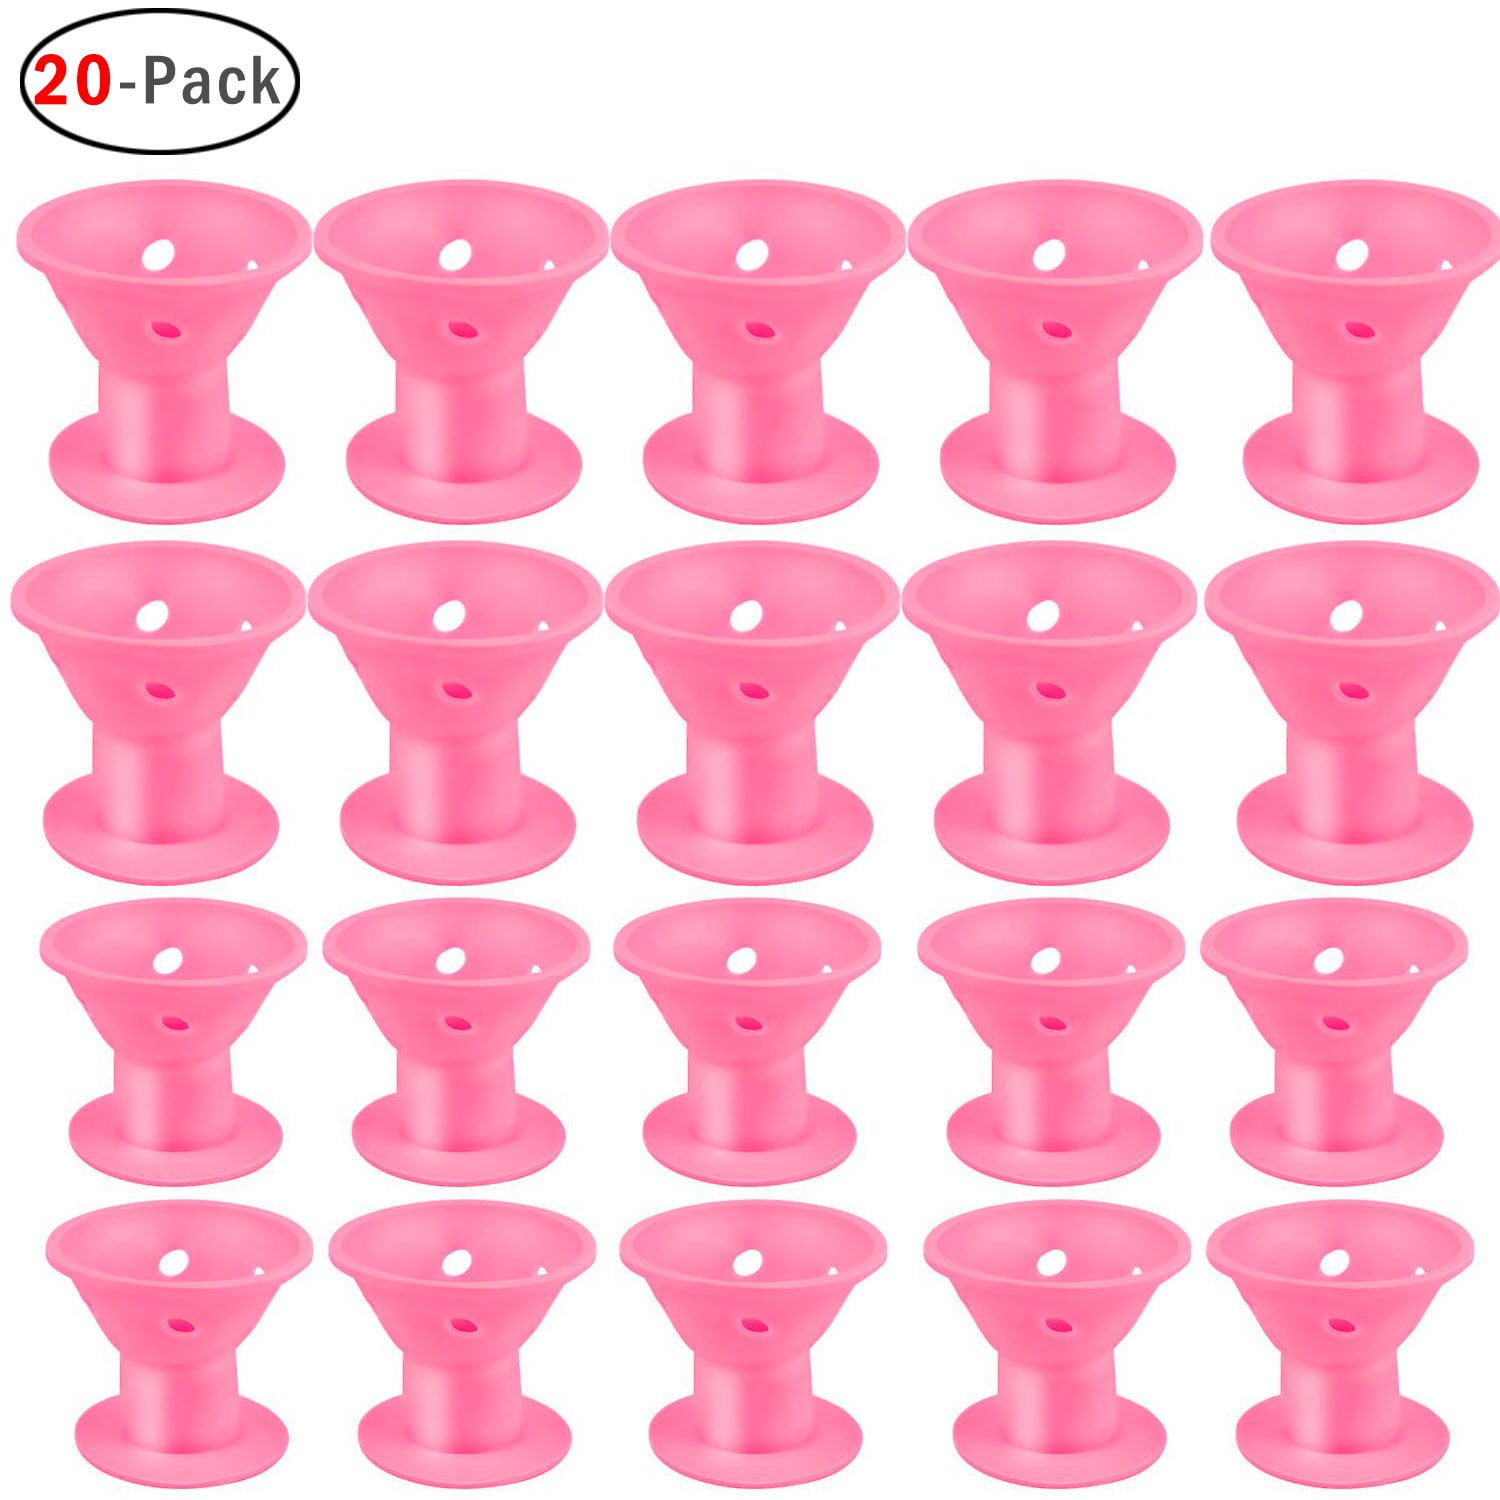 20pcs Magic Silicone Hair Curlers Rollers No Clip Hair Style Rollers Soft  Magic DIY Curling Hairstyle Tools Hair Accessories 